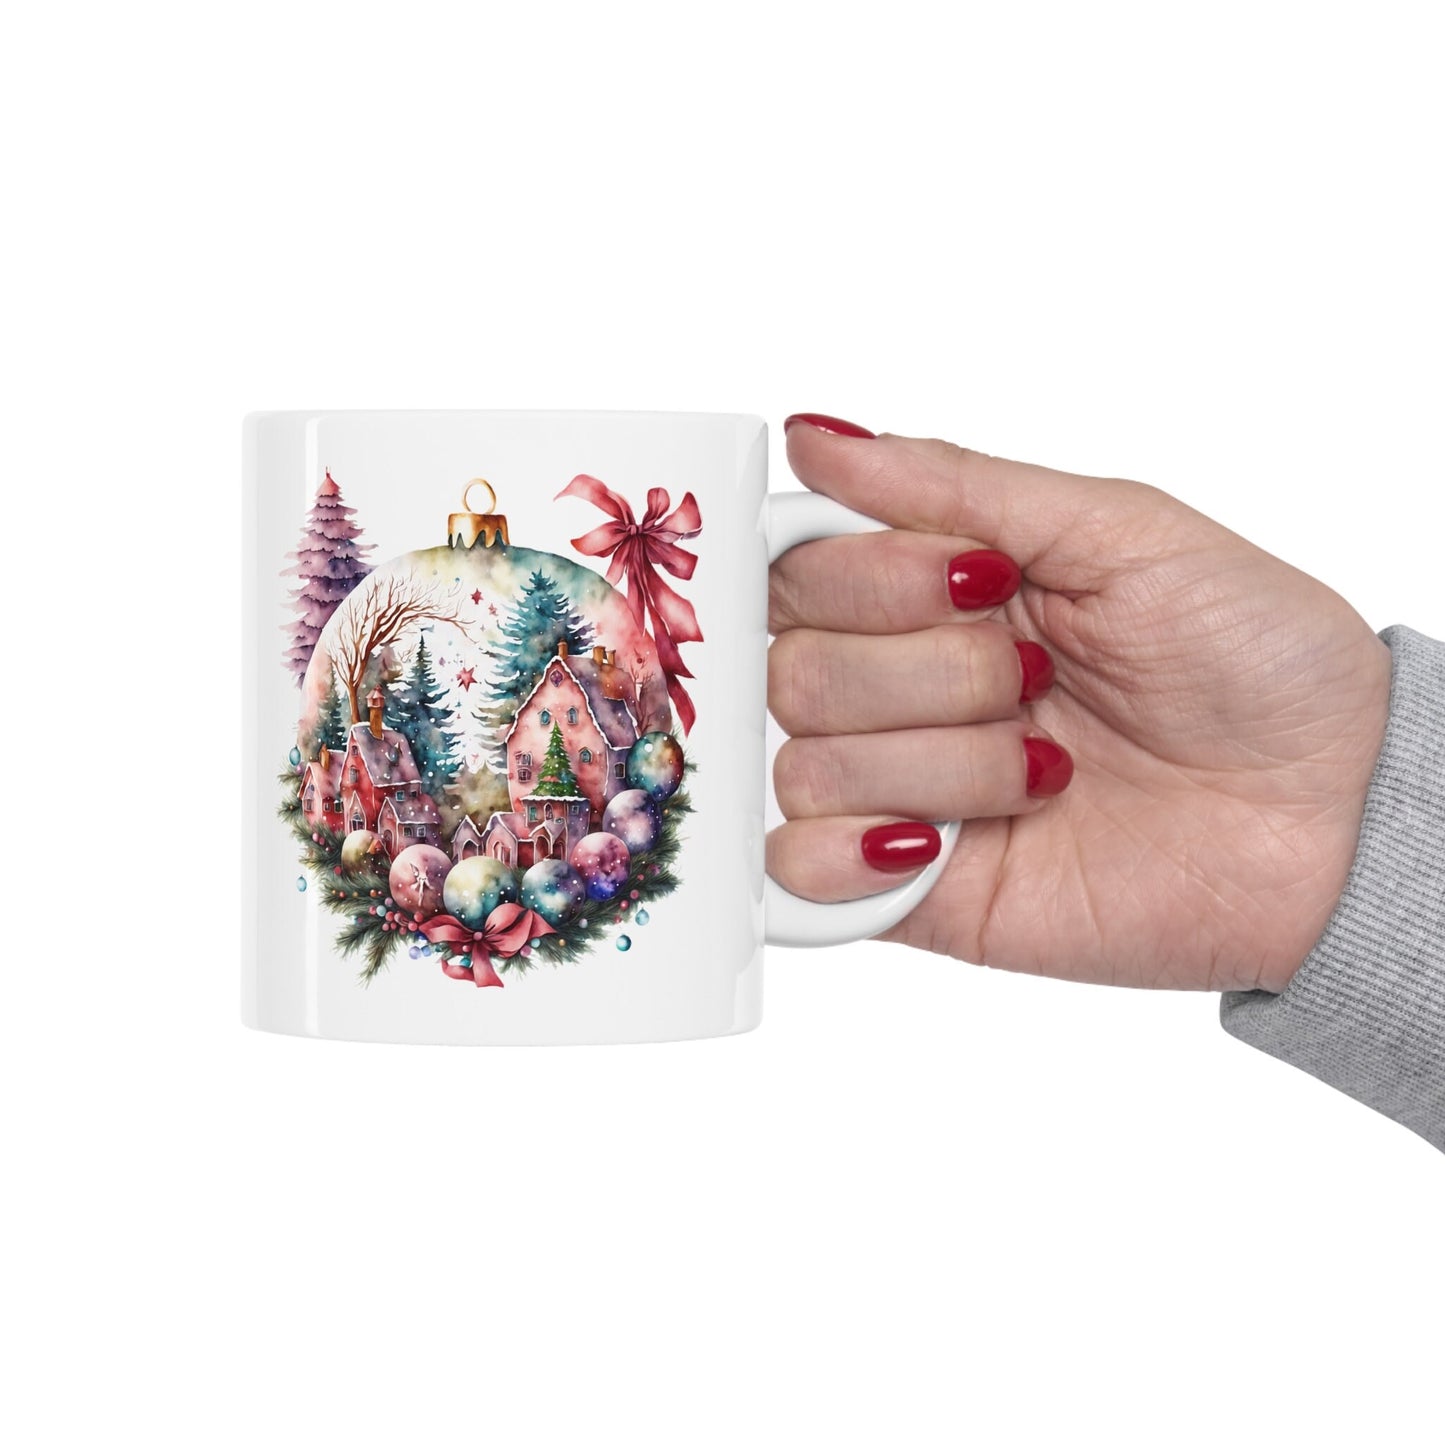 The Christmas Ornament Village Mug Makes the Perfect Gift for Friends, Family, Coworkers or yourself.  Check Out My Shop for even more Great Designs.
www.scorpiontees.etsy.com